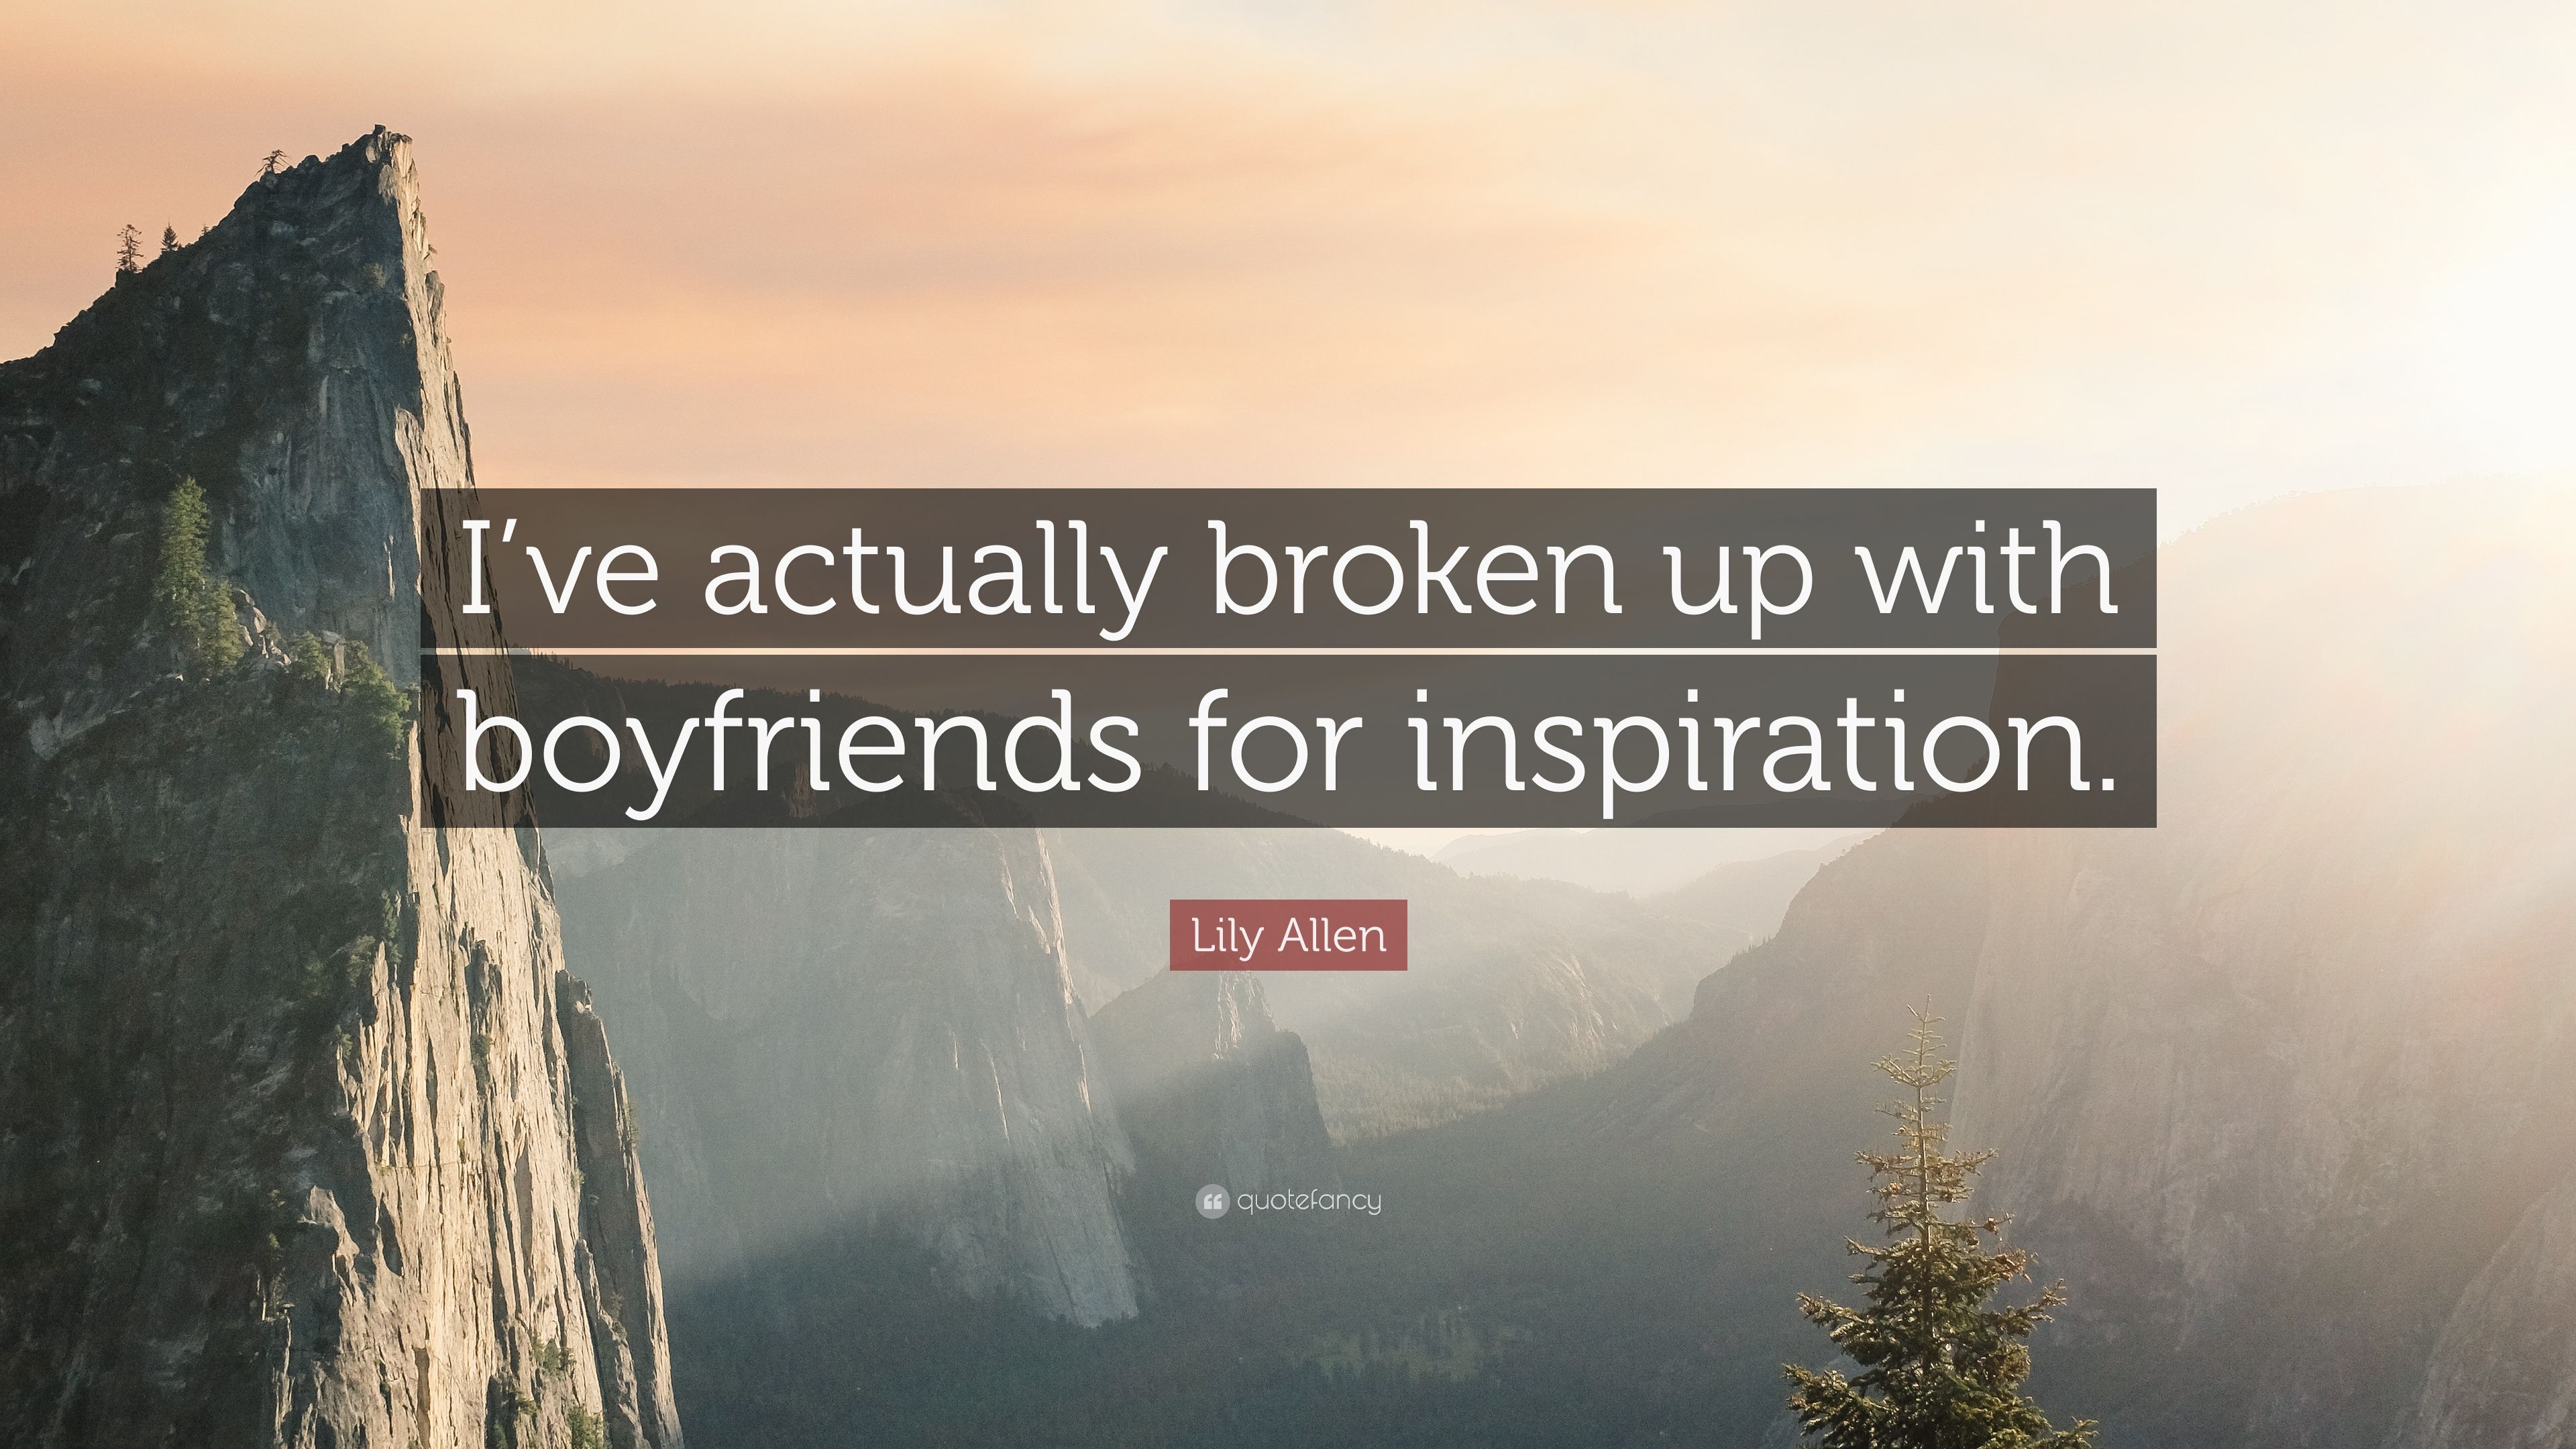 Lily Allen Quote: “I've actually broken up with boyfriends for inspiration.” (7 wallpaper)